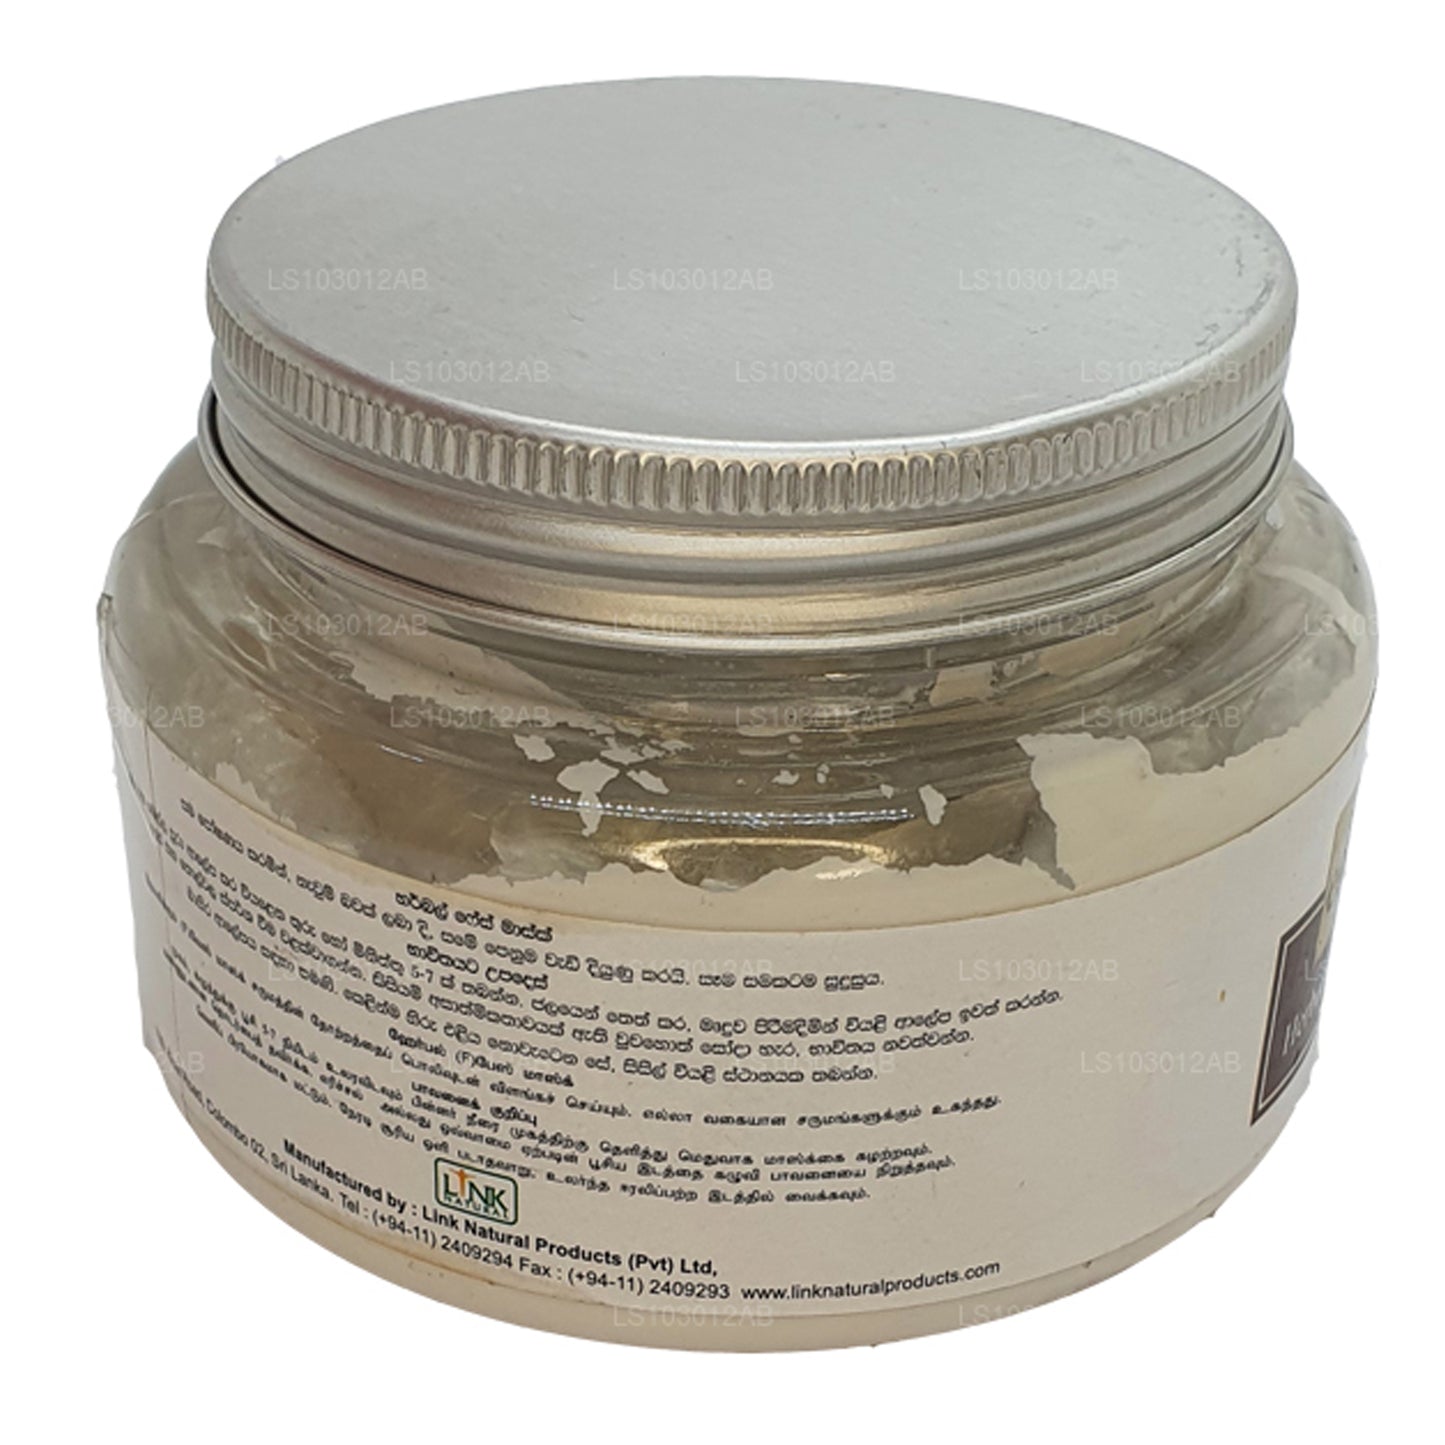 Link Natural Earth Essence taimne näomask (200g)